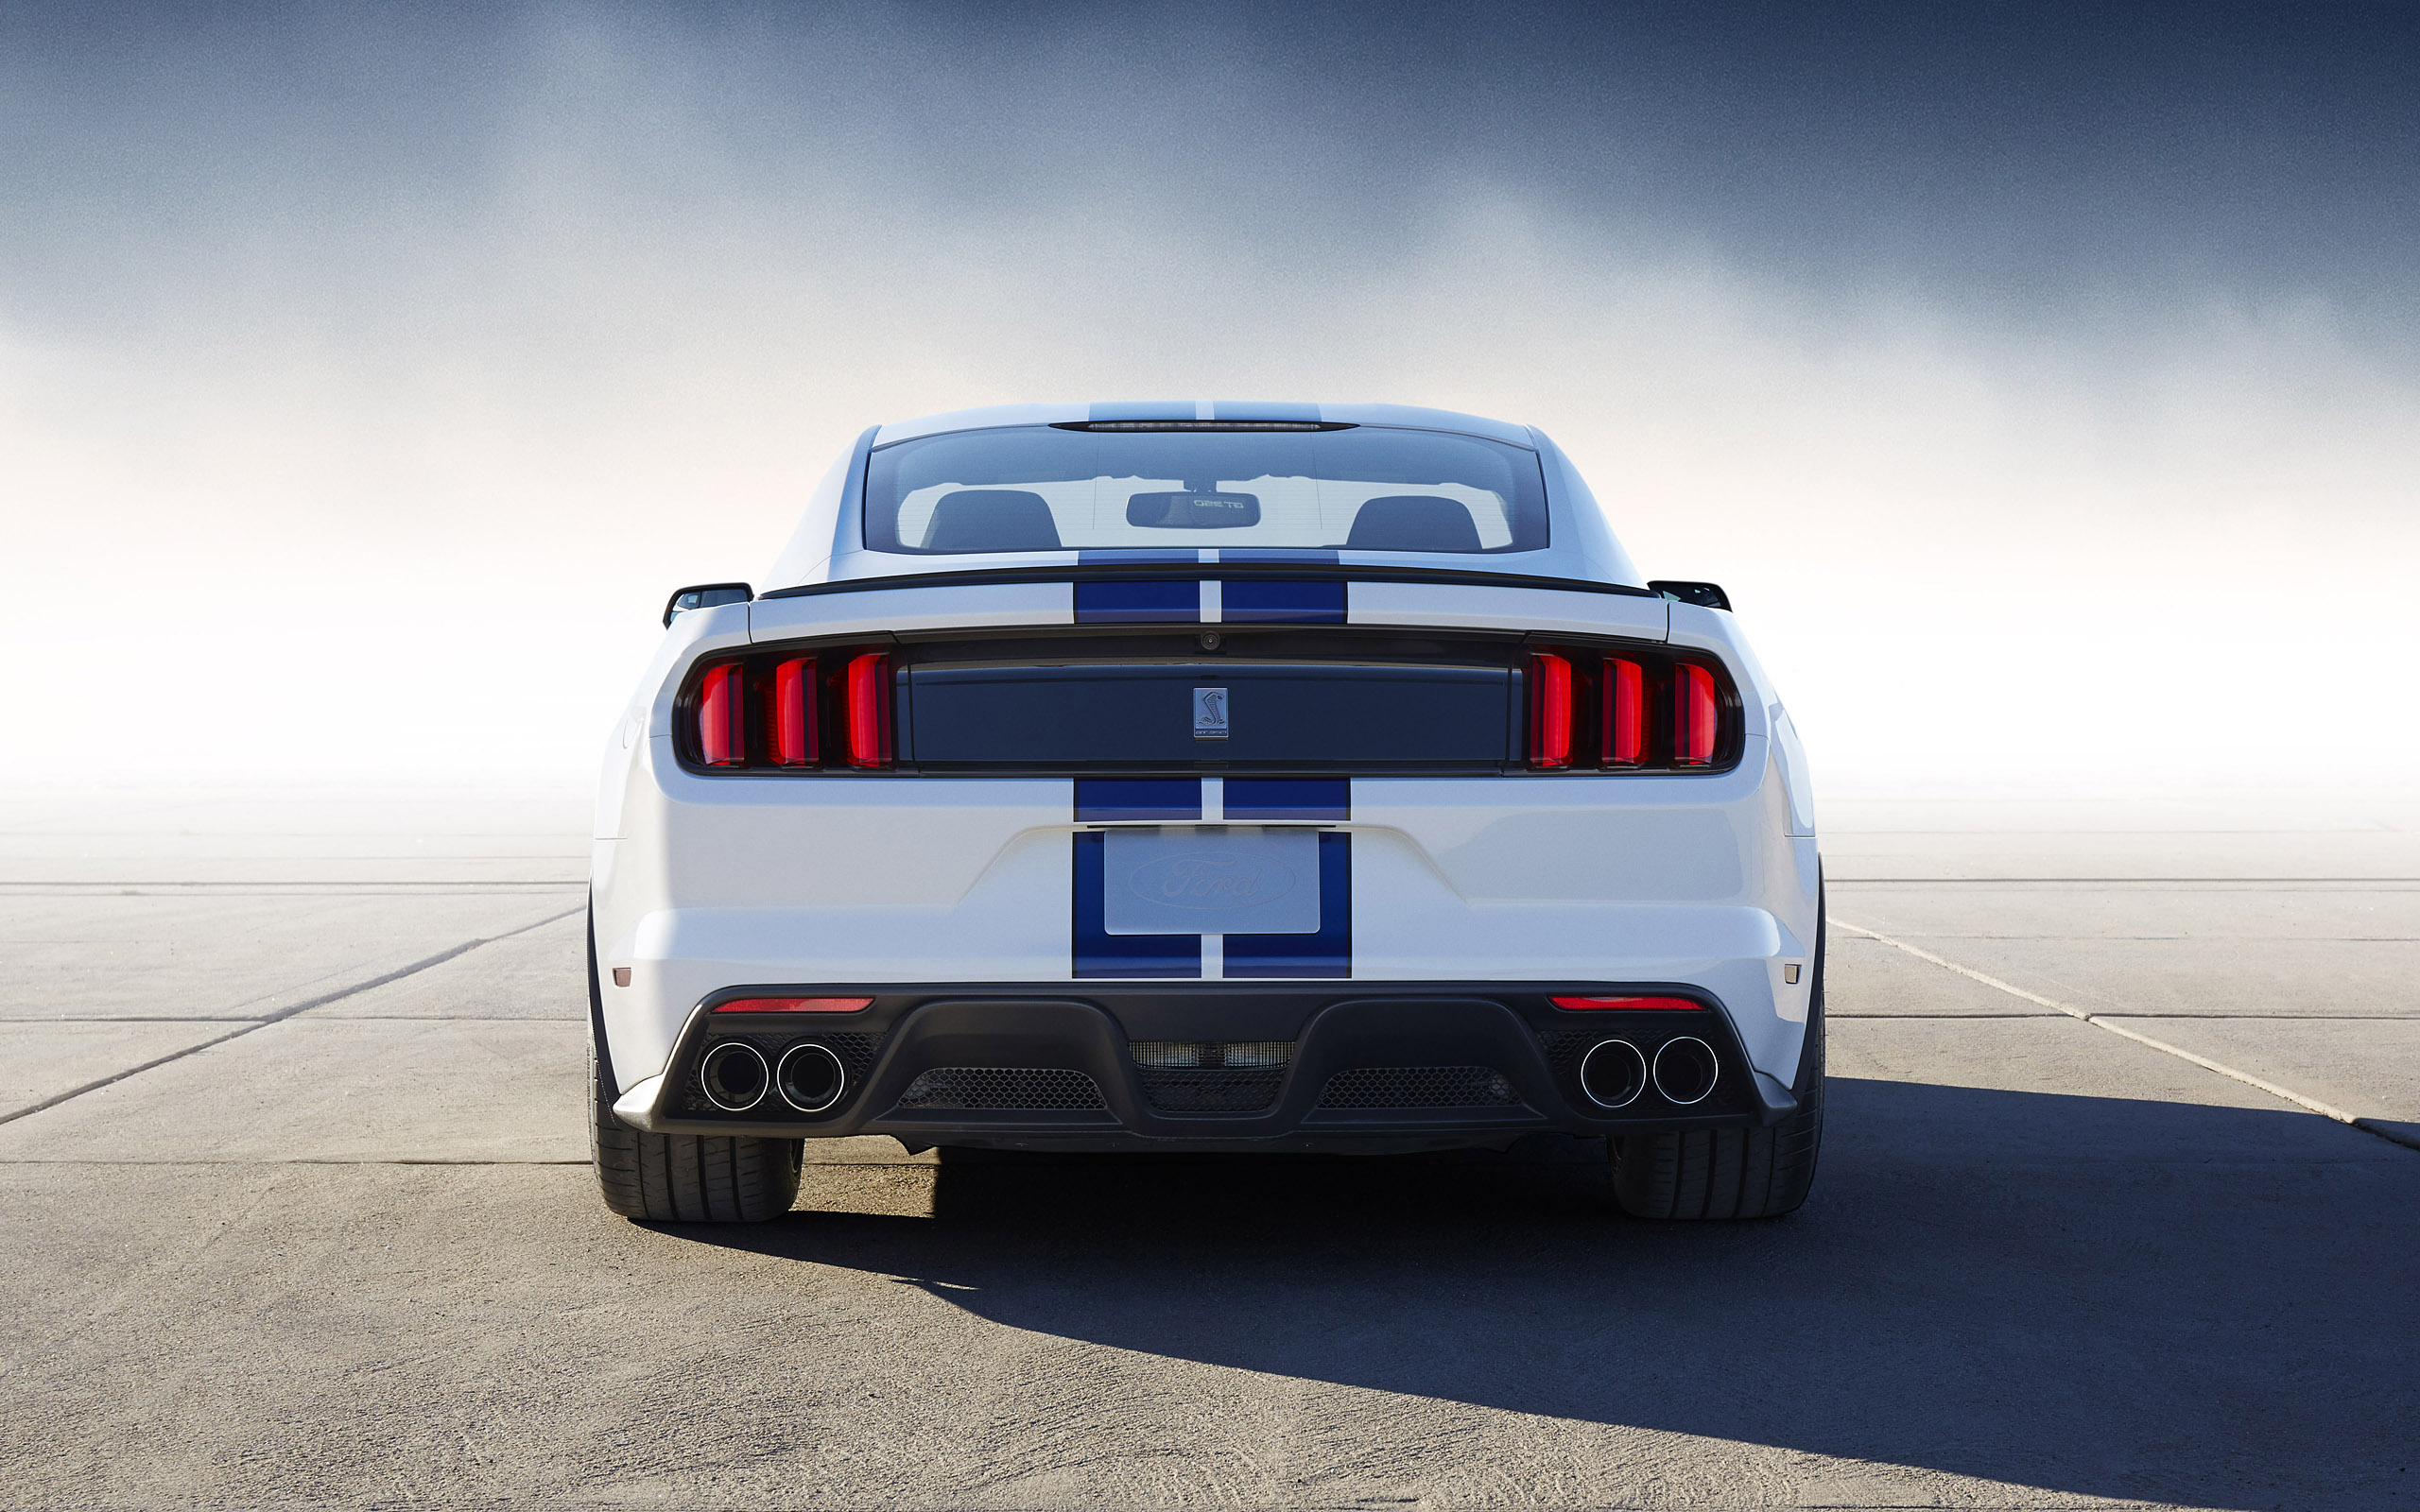  2016 Ford Shelby Mustang GT350 Wallpaper.